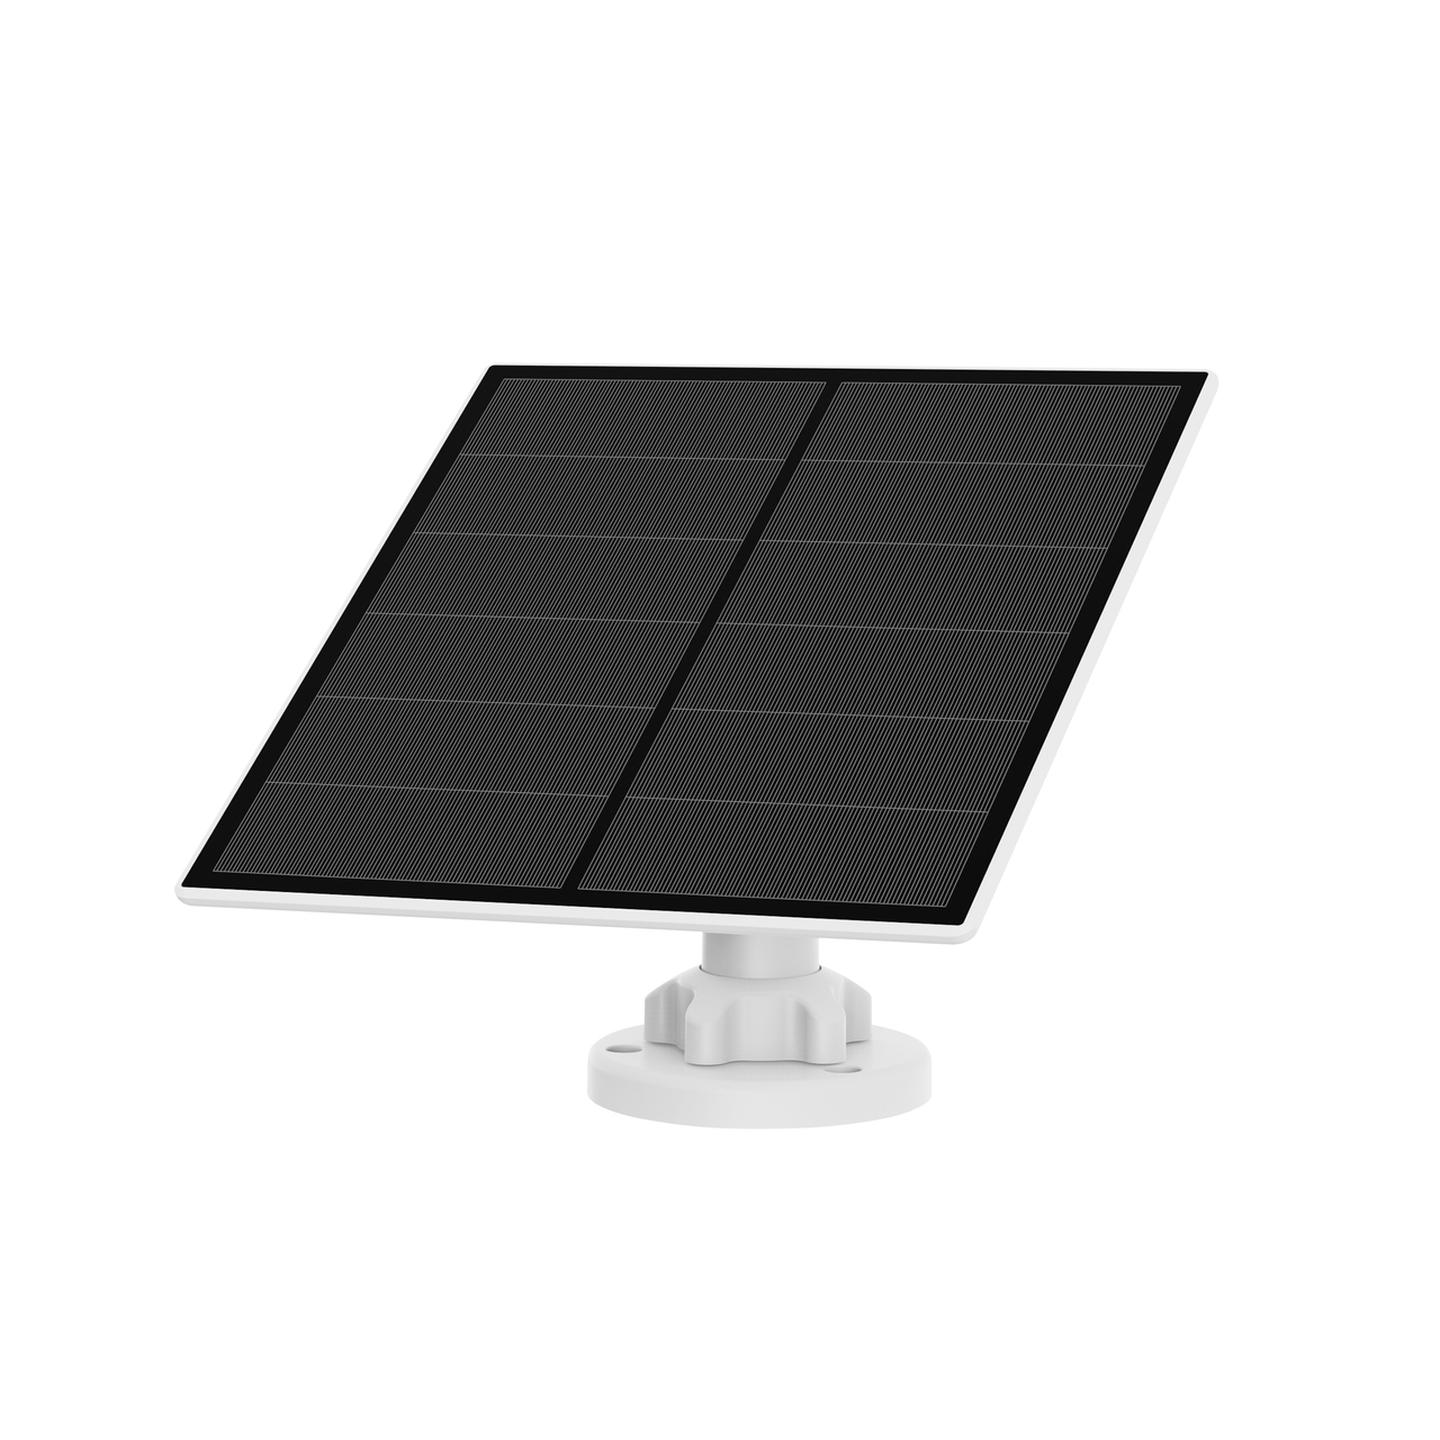 Concord Solar Panel to Suit Wi-Fi Battery Powered Cameras  QC3910/QC3912